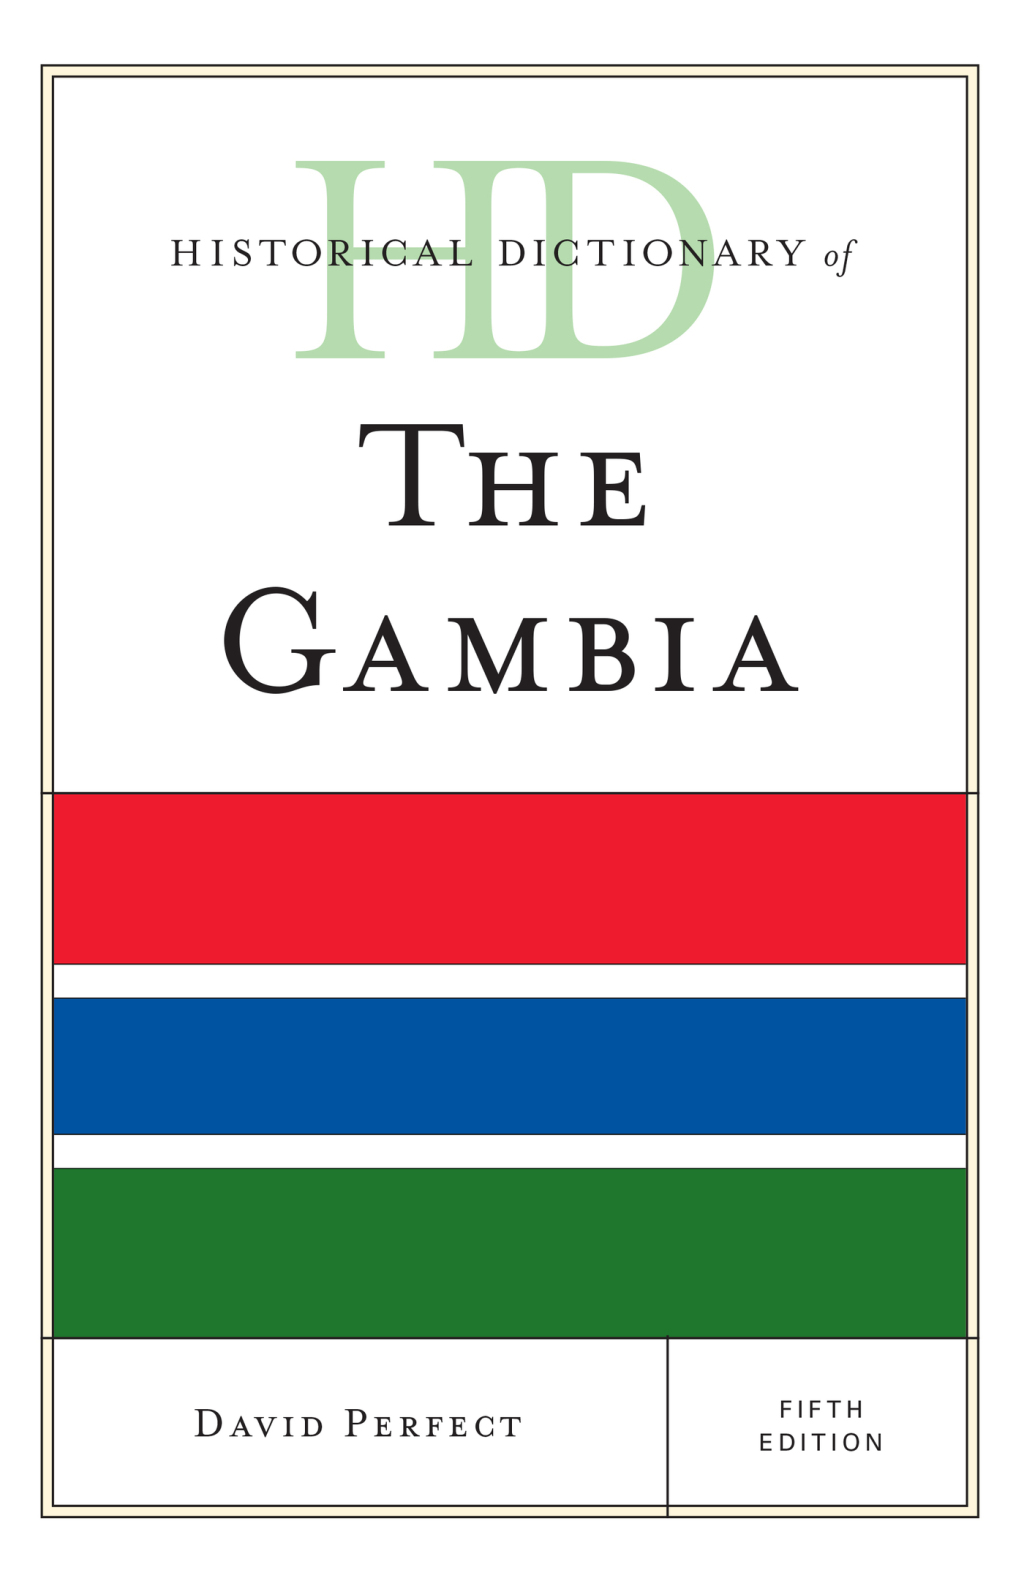 Historical Dictionary of The Gambia - 5th Edition (eBook)